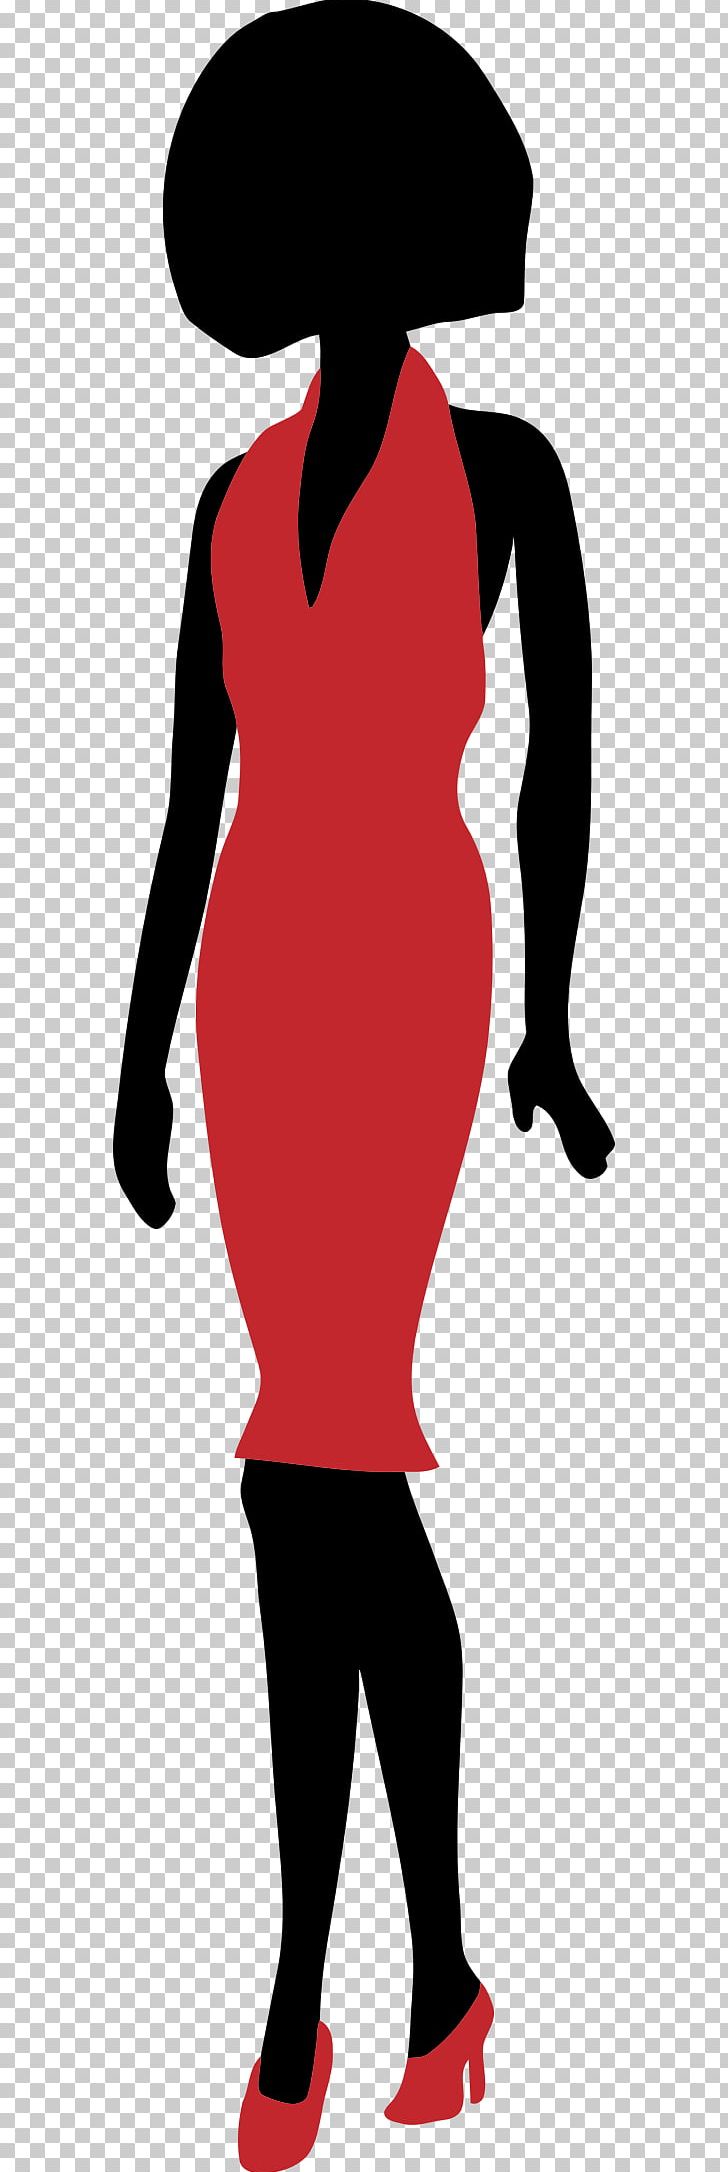 Silhouette Dress Woman PNG, Clipart, Animals, Arm, Art, Artwork, Clothing Free PNG Download